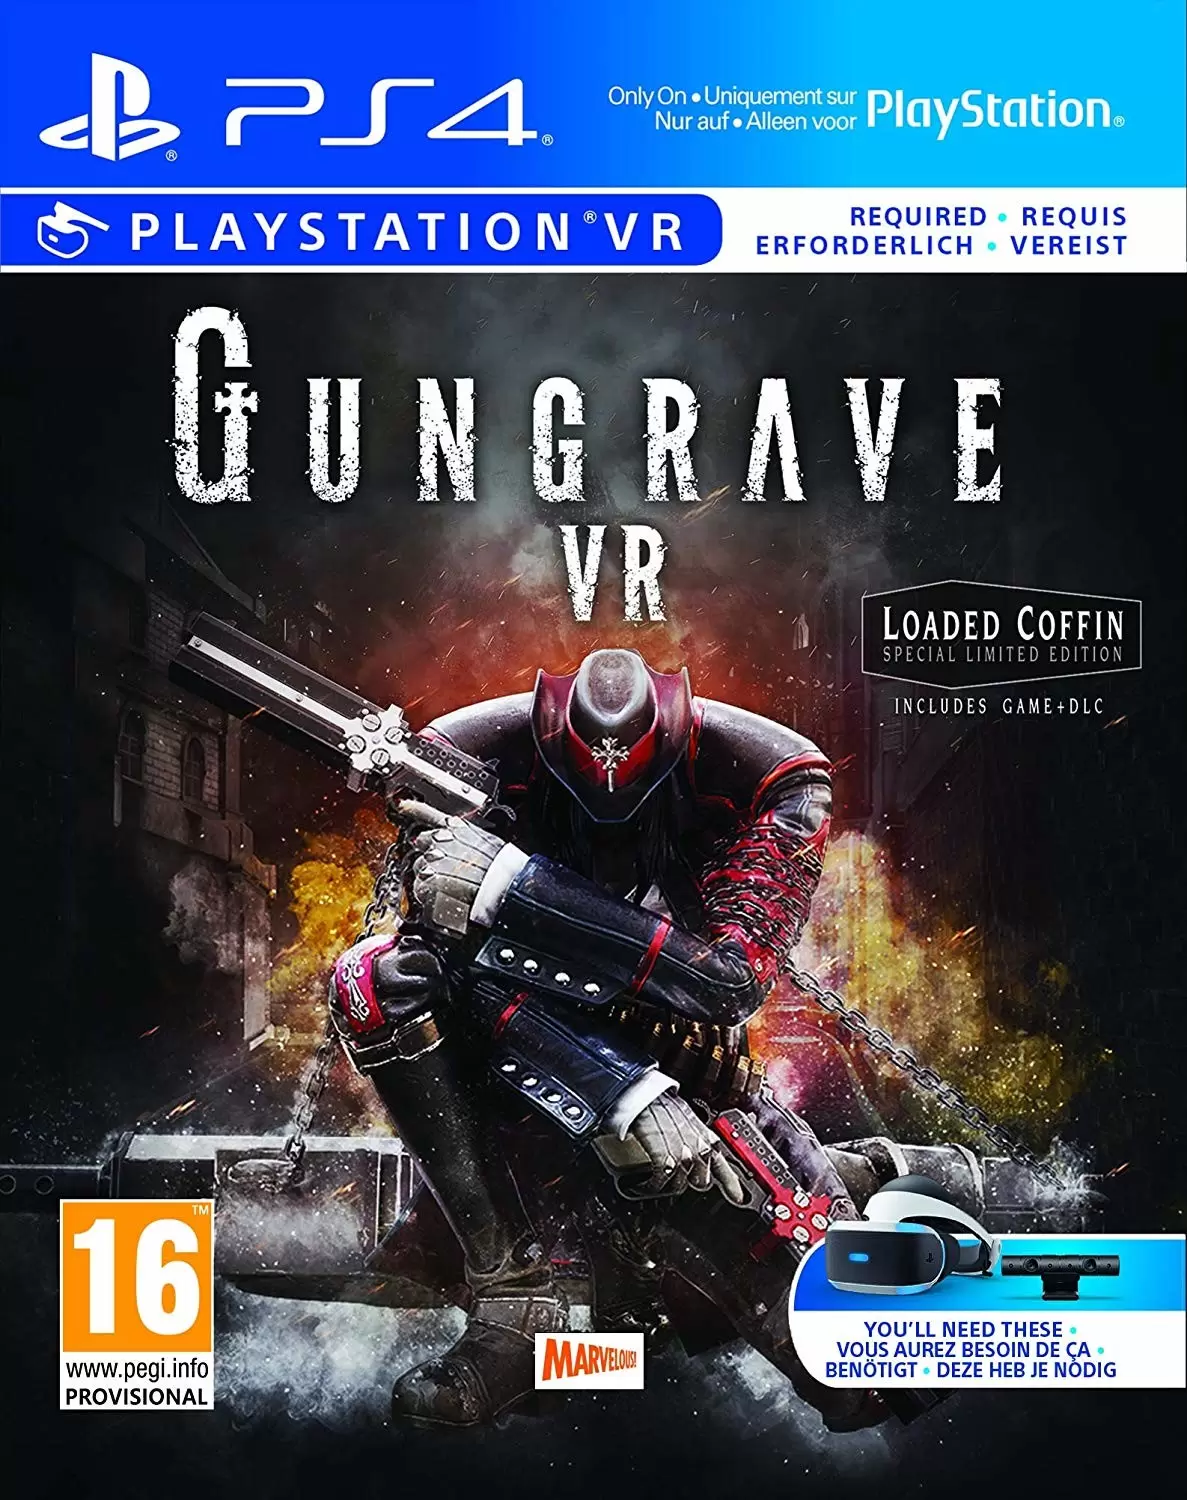 PS4 Games - Gungrave VR